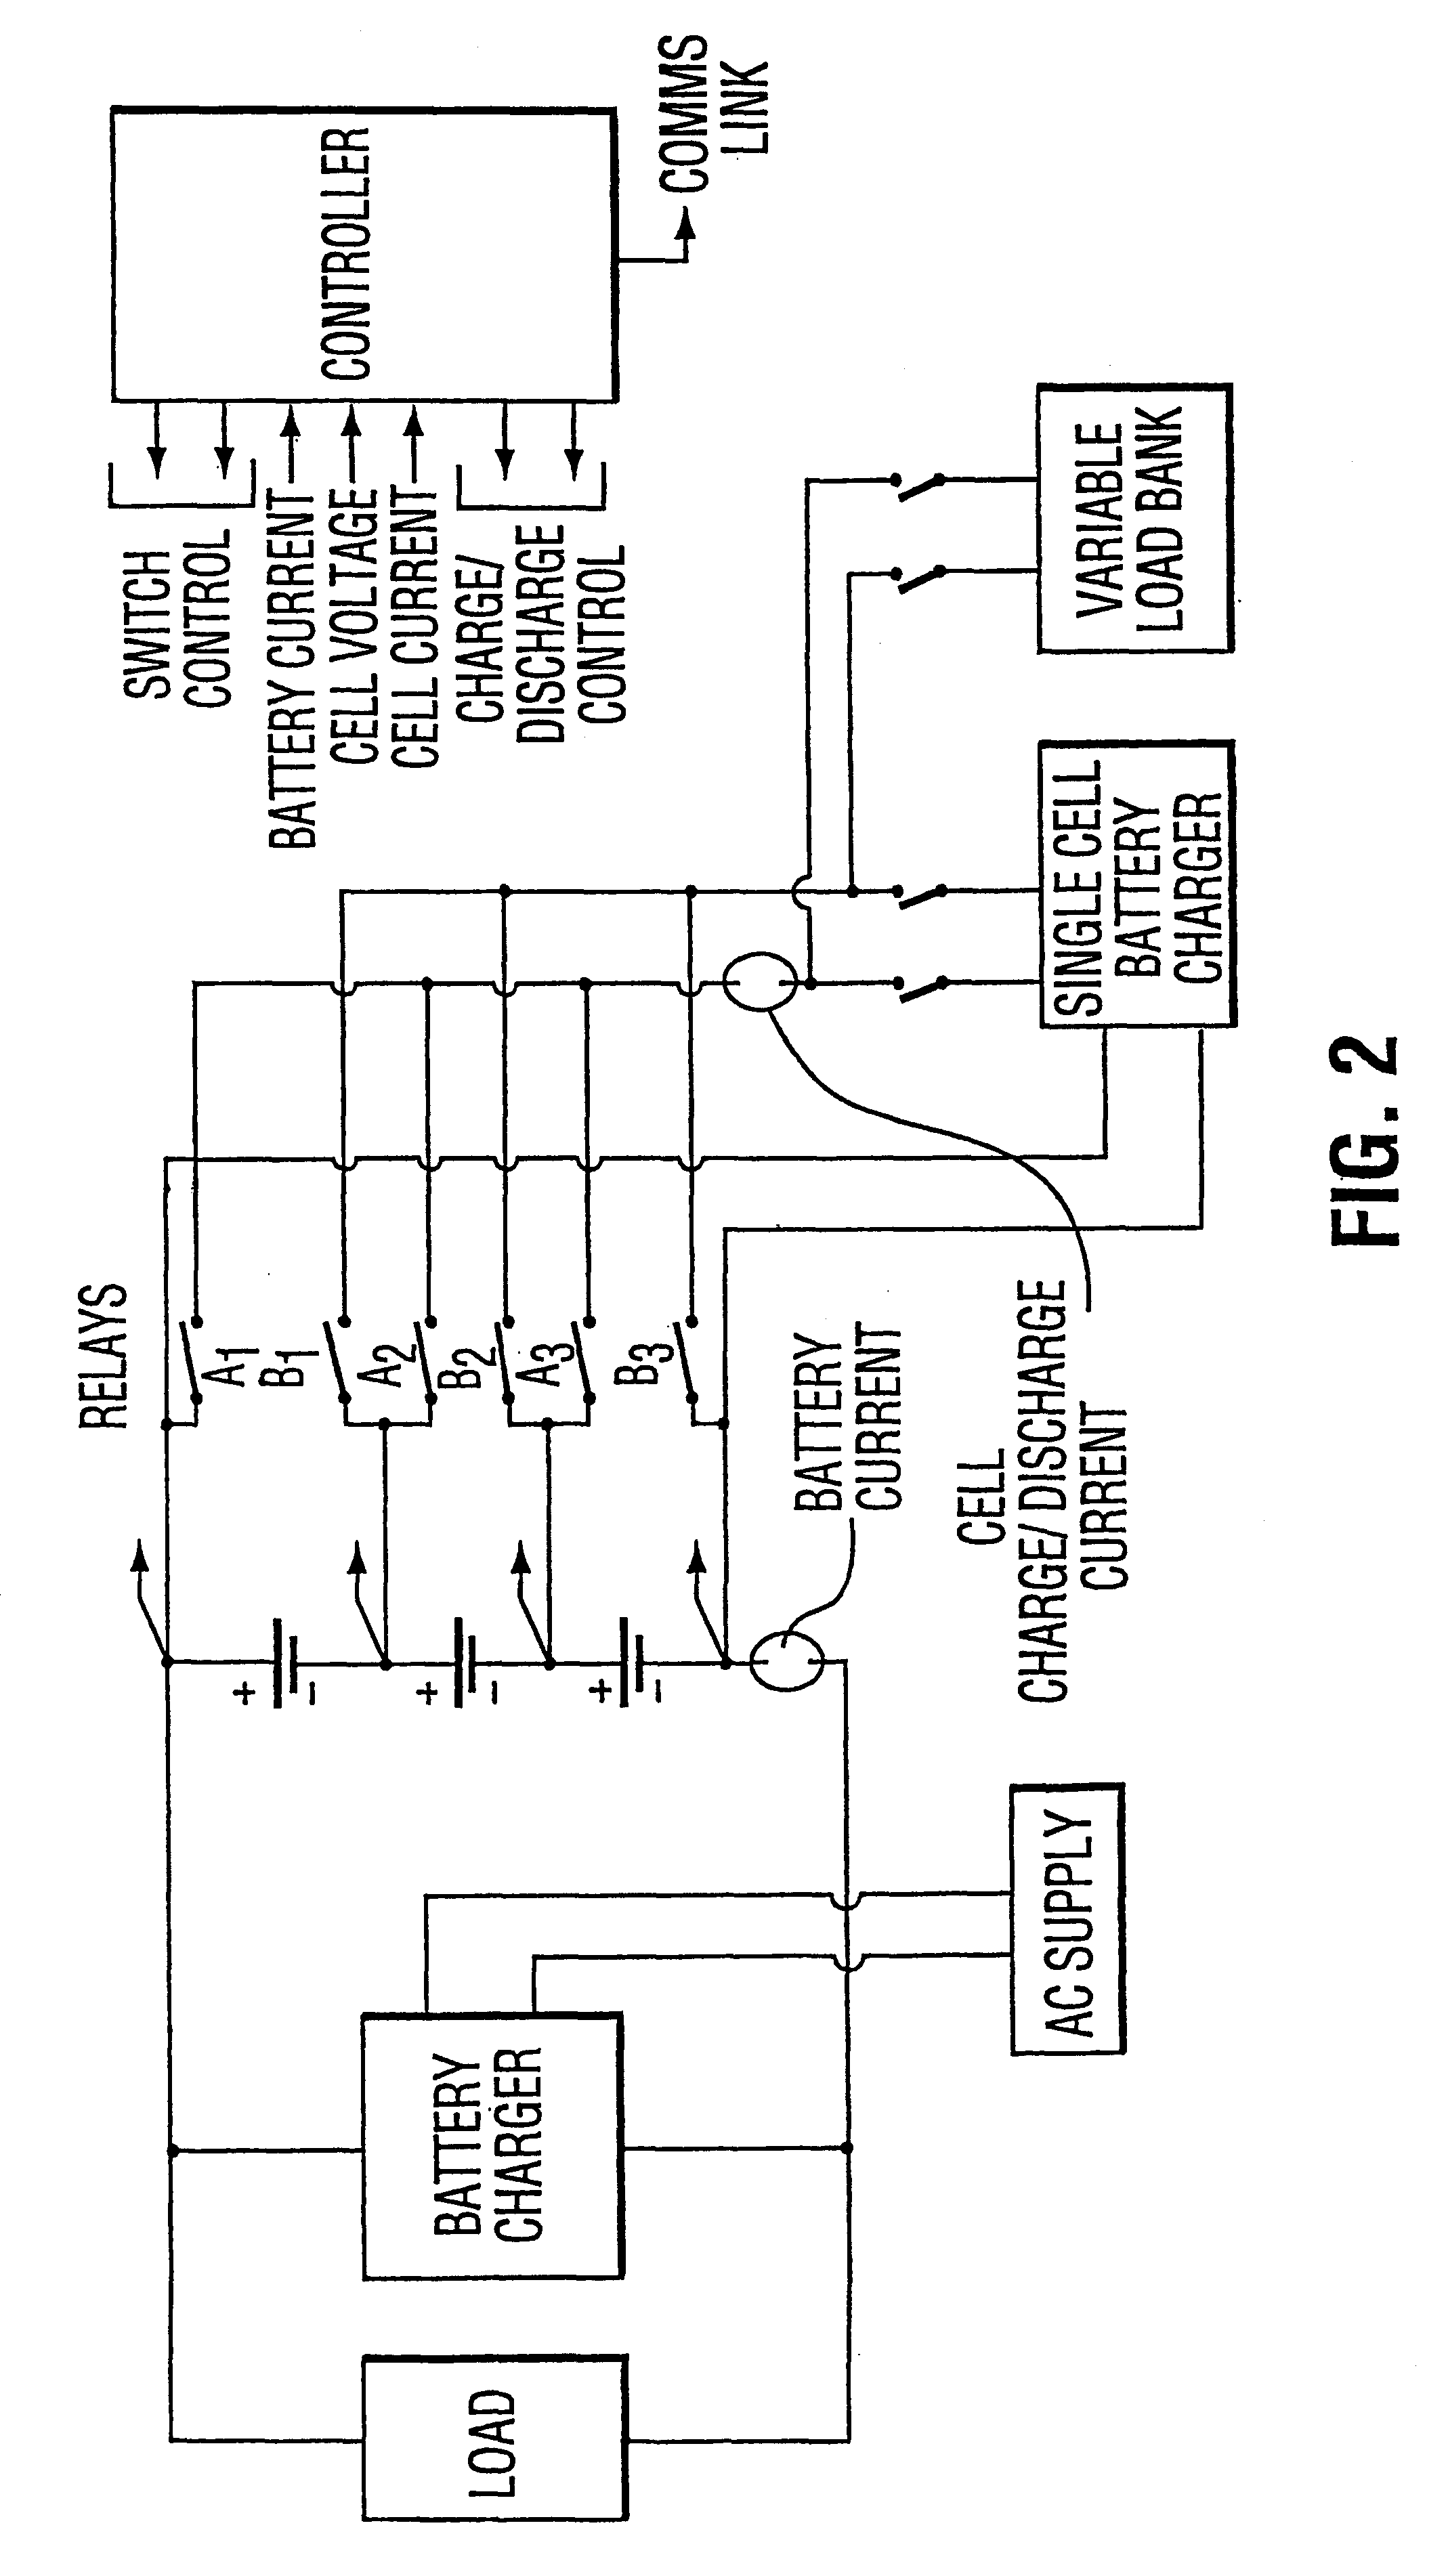 Device for managing battery packs by selectively monitoring and assessing the operative capacity of the battery modules in the pack